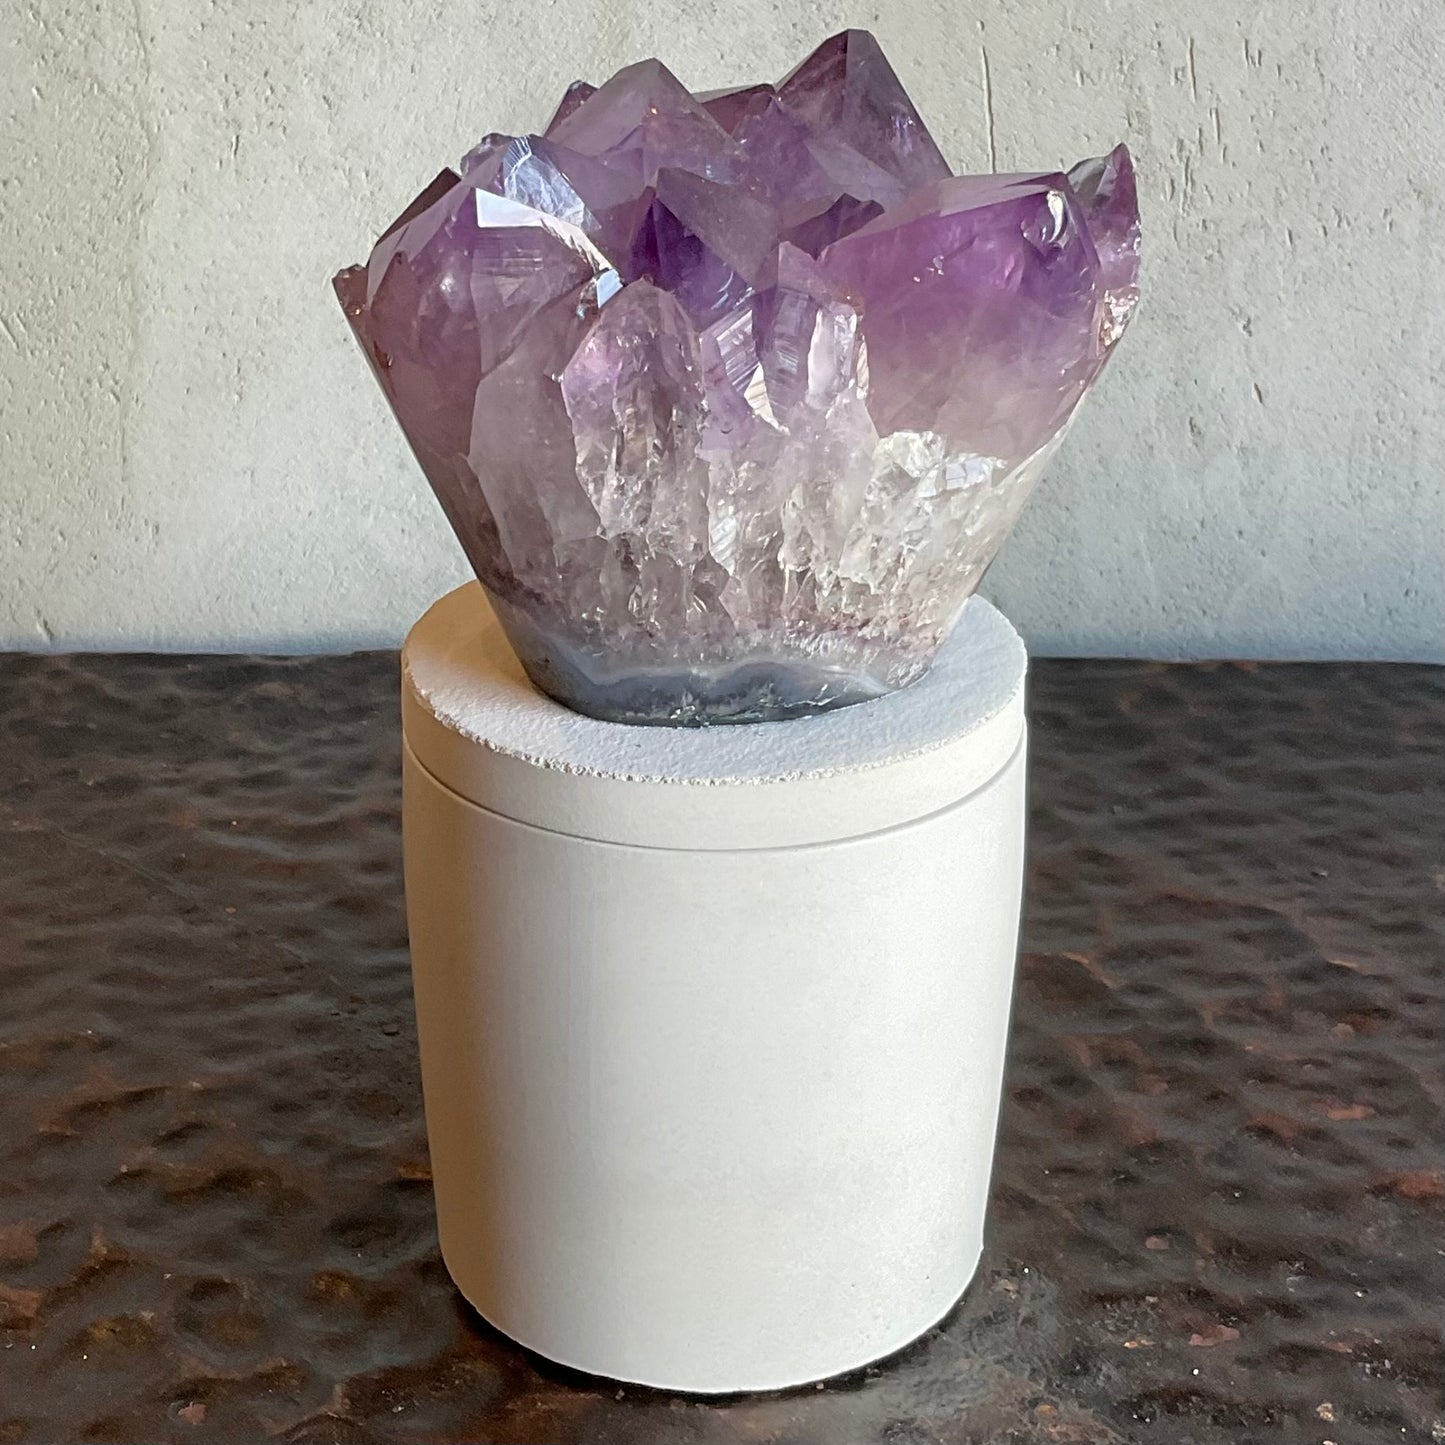 Amethyst Geode Lid Candle